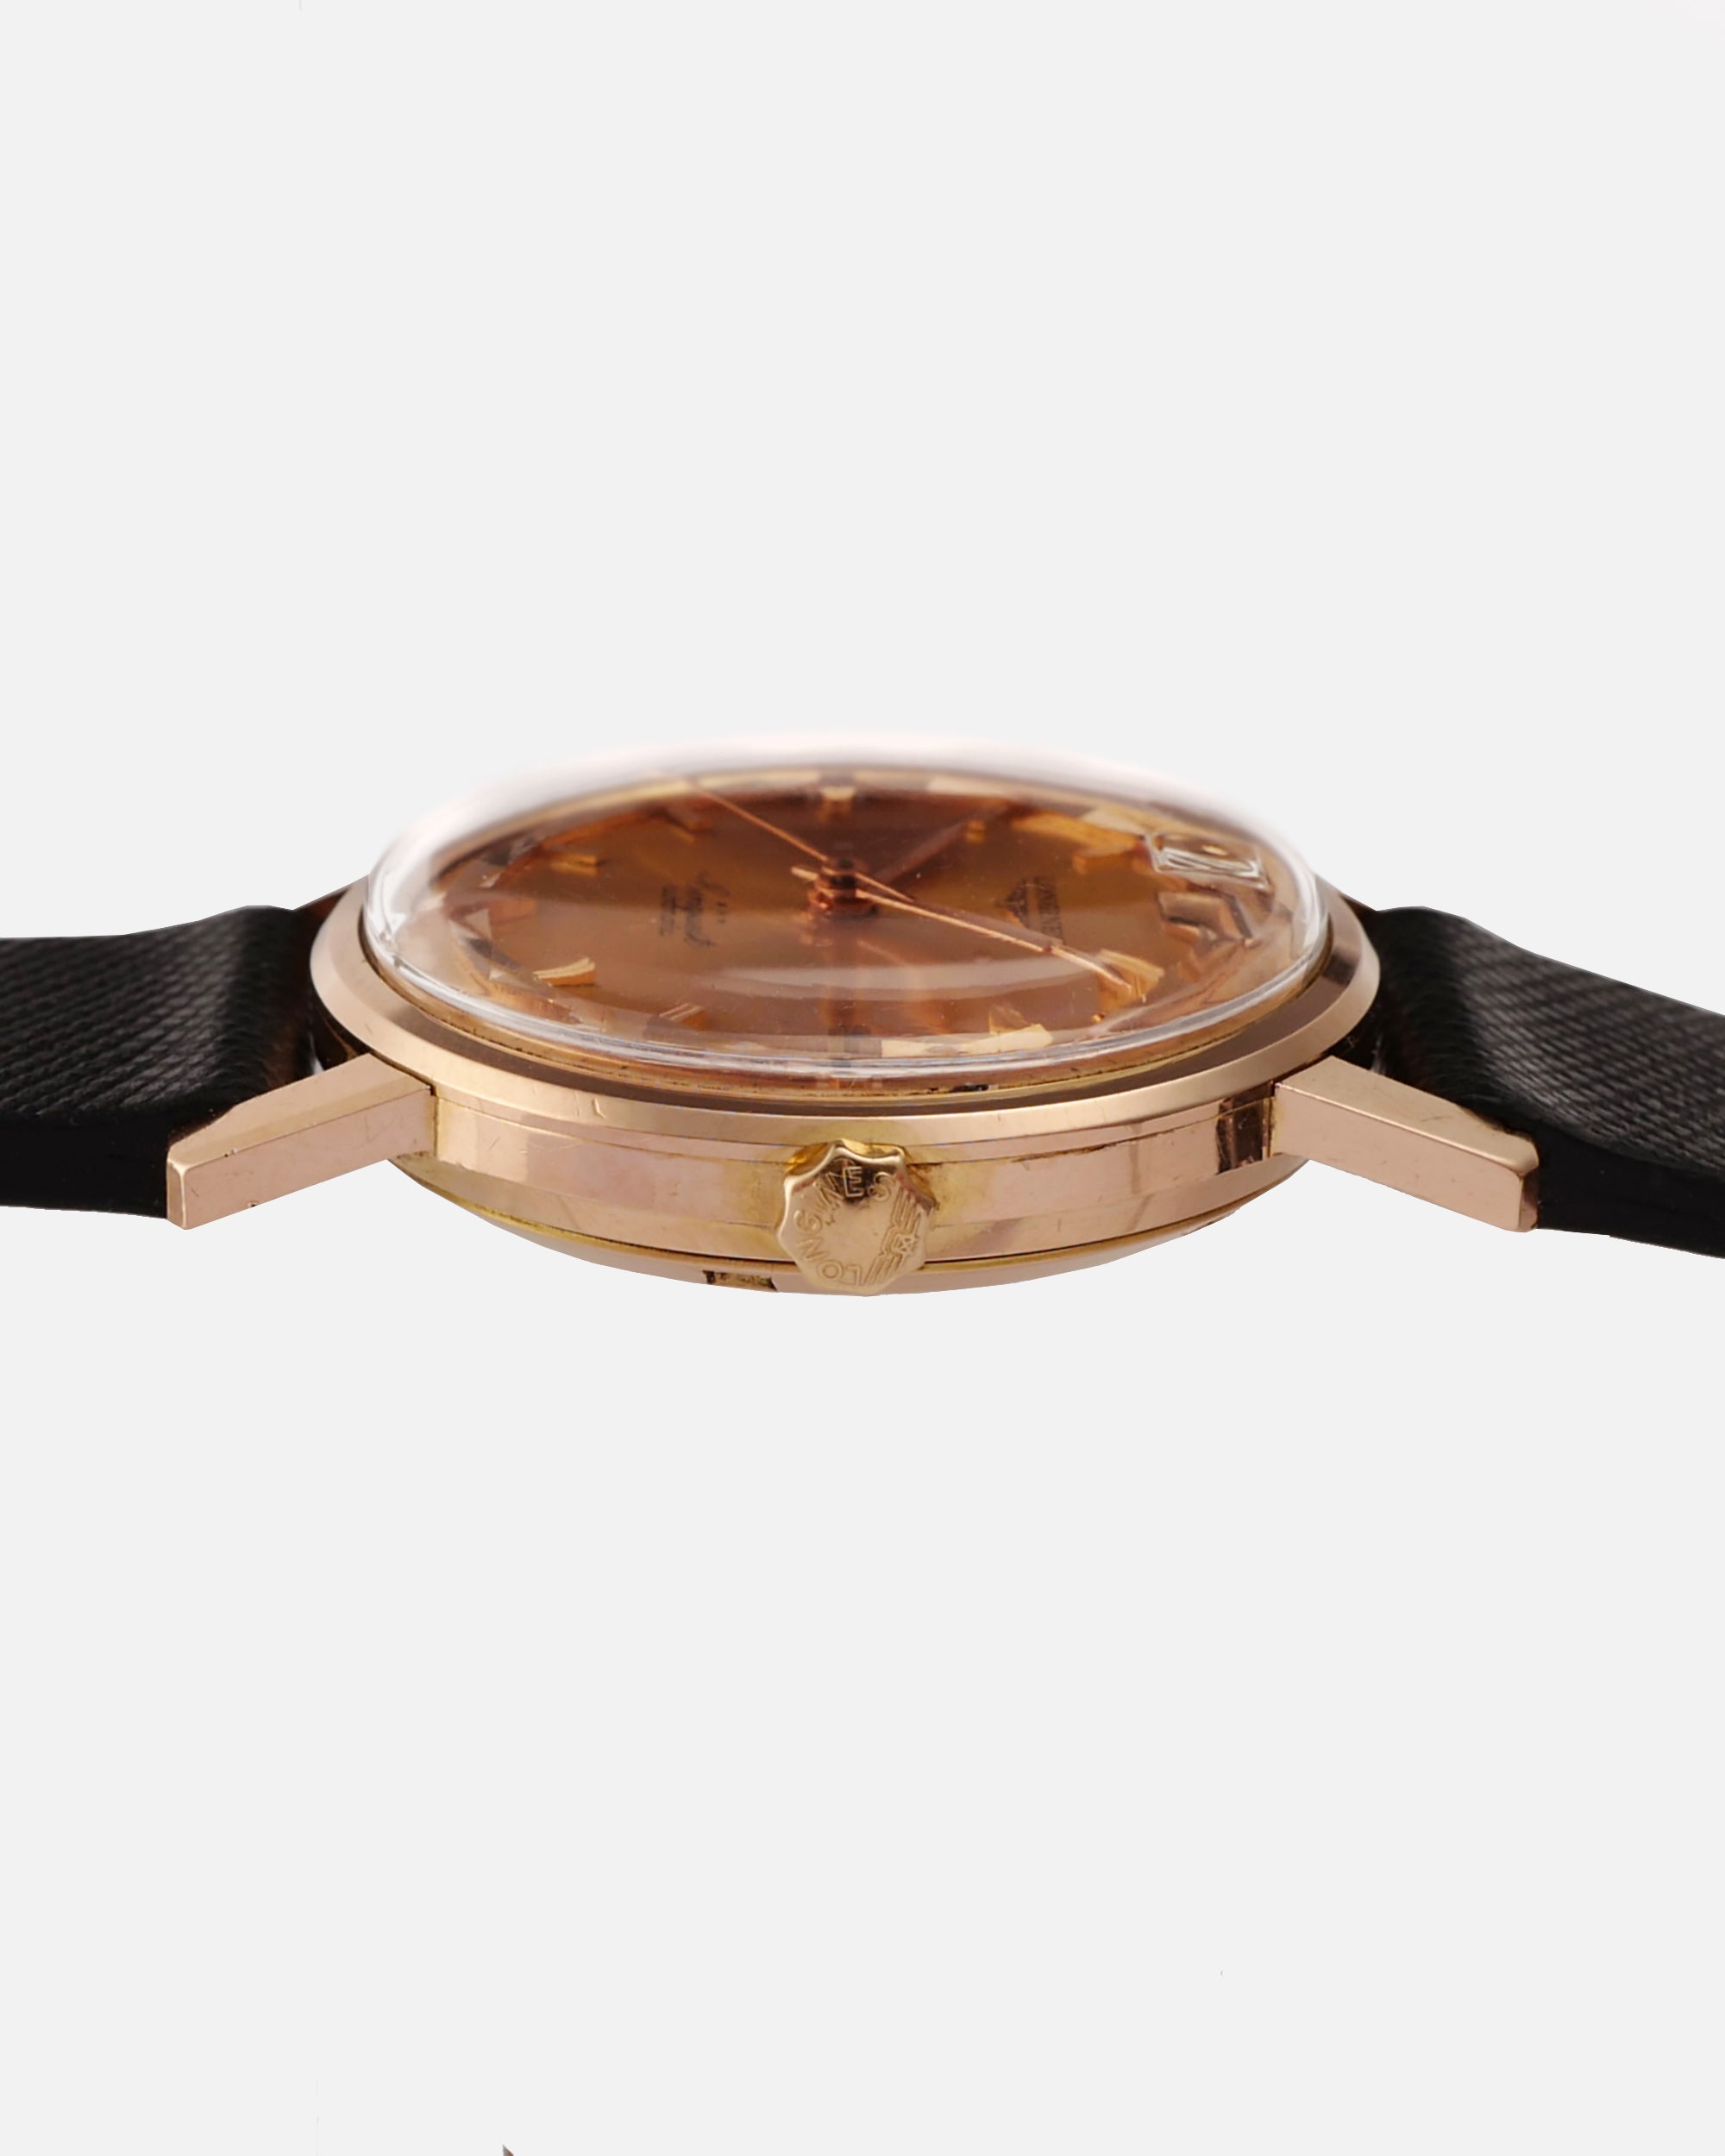 1961 Longines Conquest Ref. 9025/4 Deluxe | 18kt Rose Gold | Extract From Archives